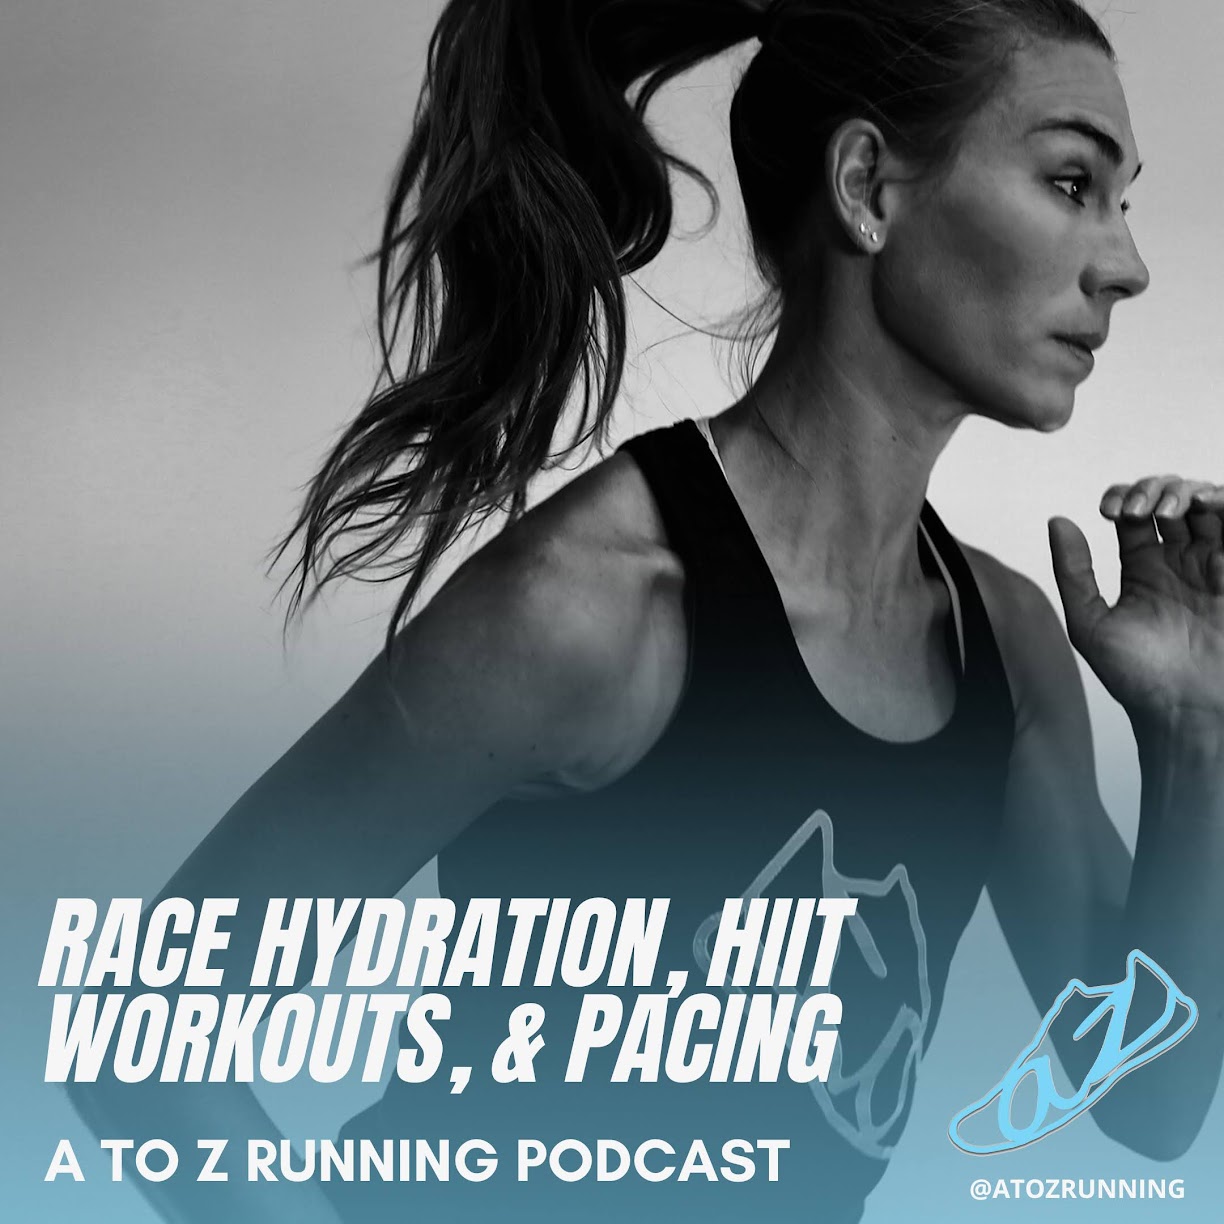 woman doing hiit workout in the background, words on photo read race hydration, HIIT workouts, and pacing